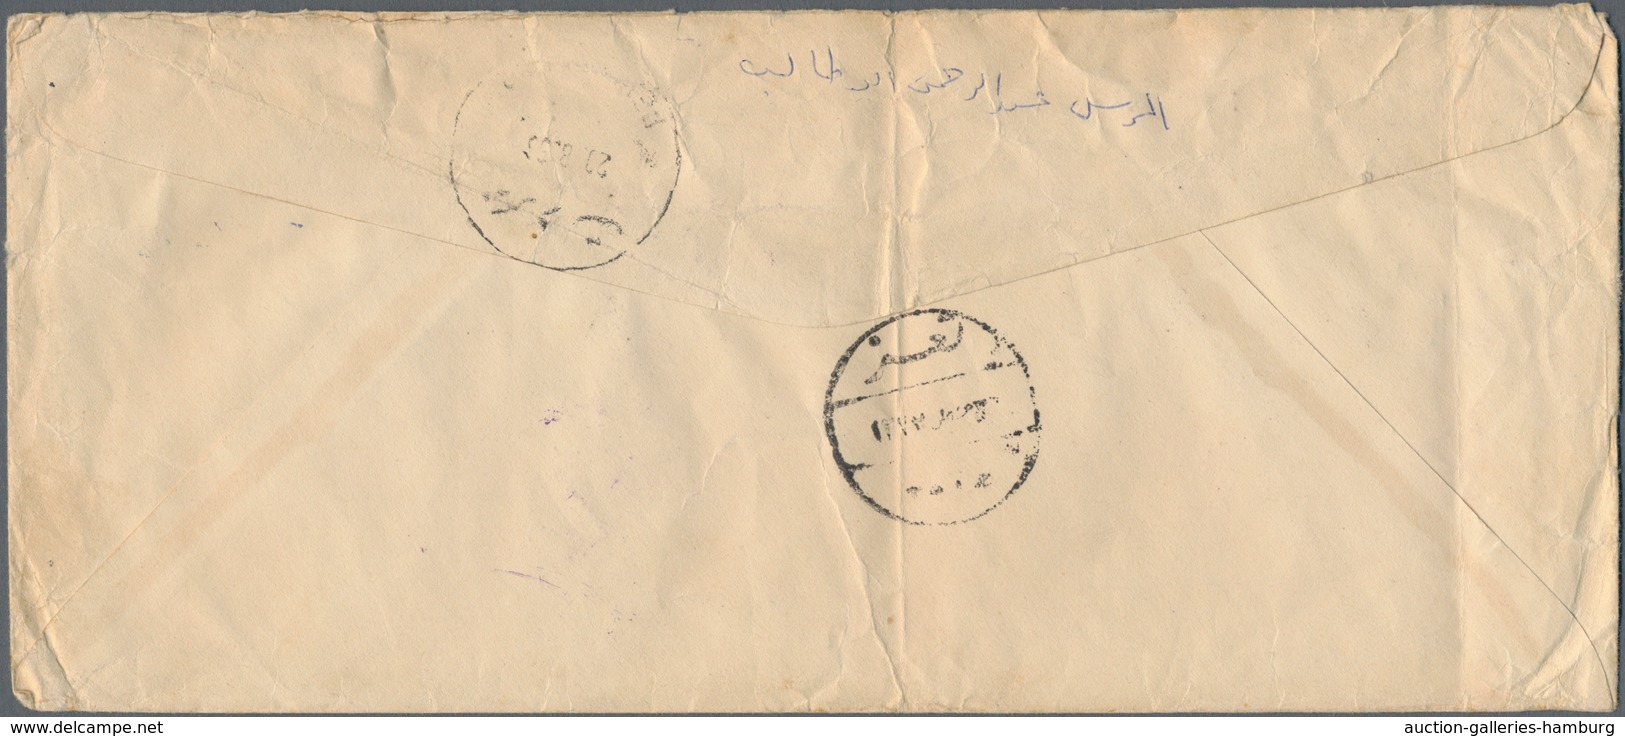 Jemen: 1940, 1 Imadi (2) Used On Commercial Cover Cancelled By Black "HODEIDA" Cds With Separate Sin - Yemen